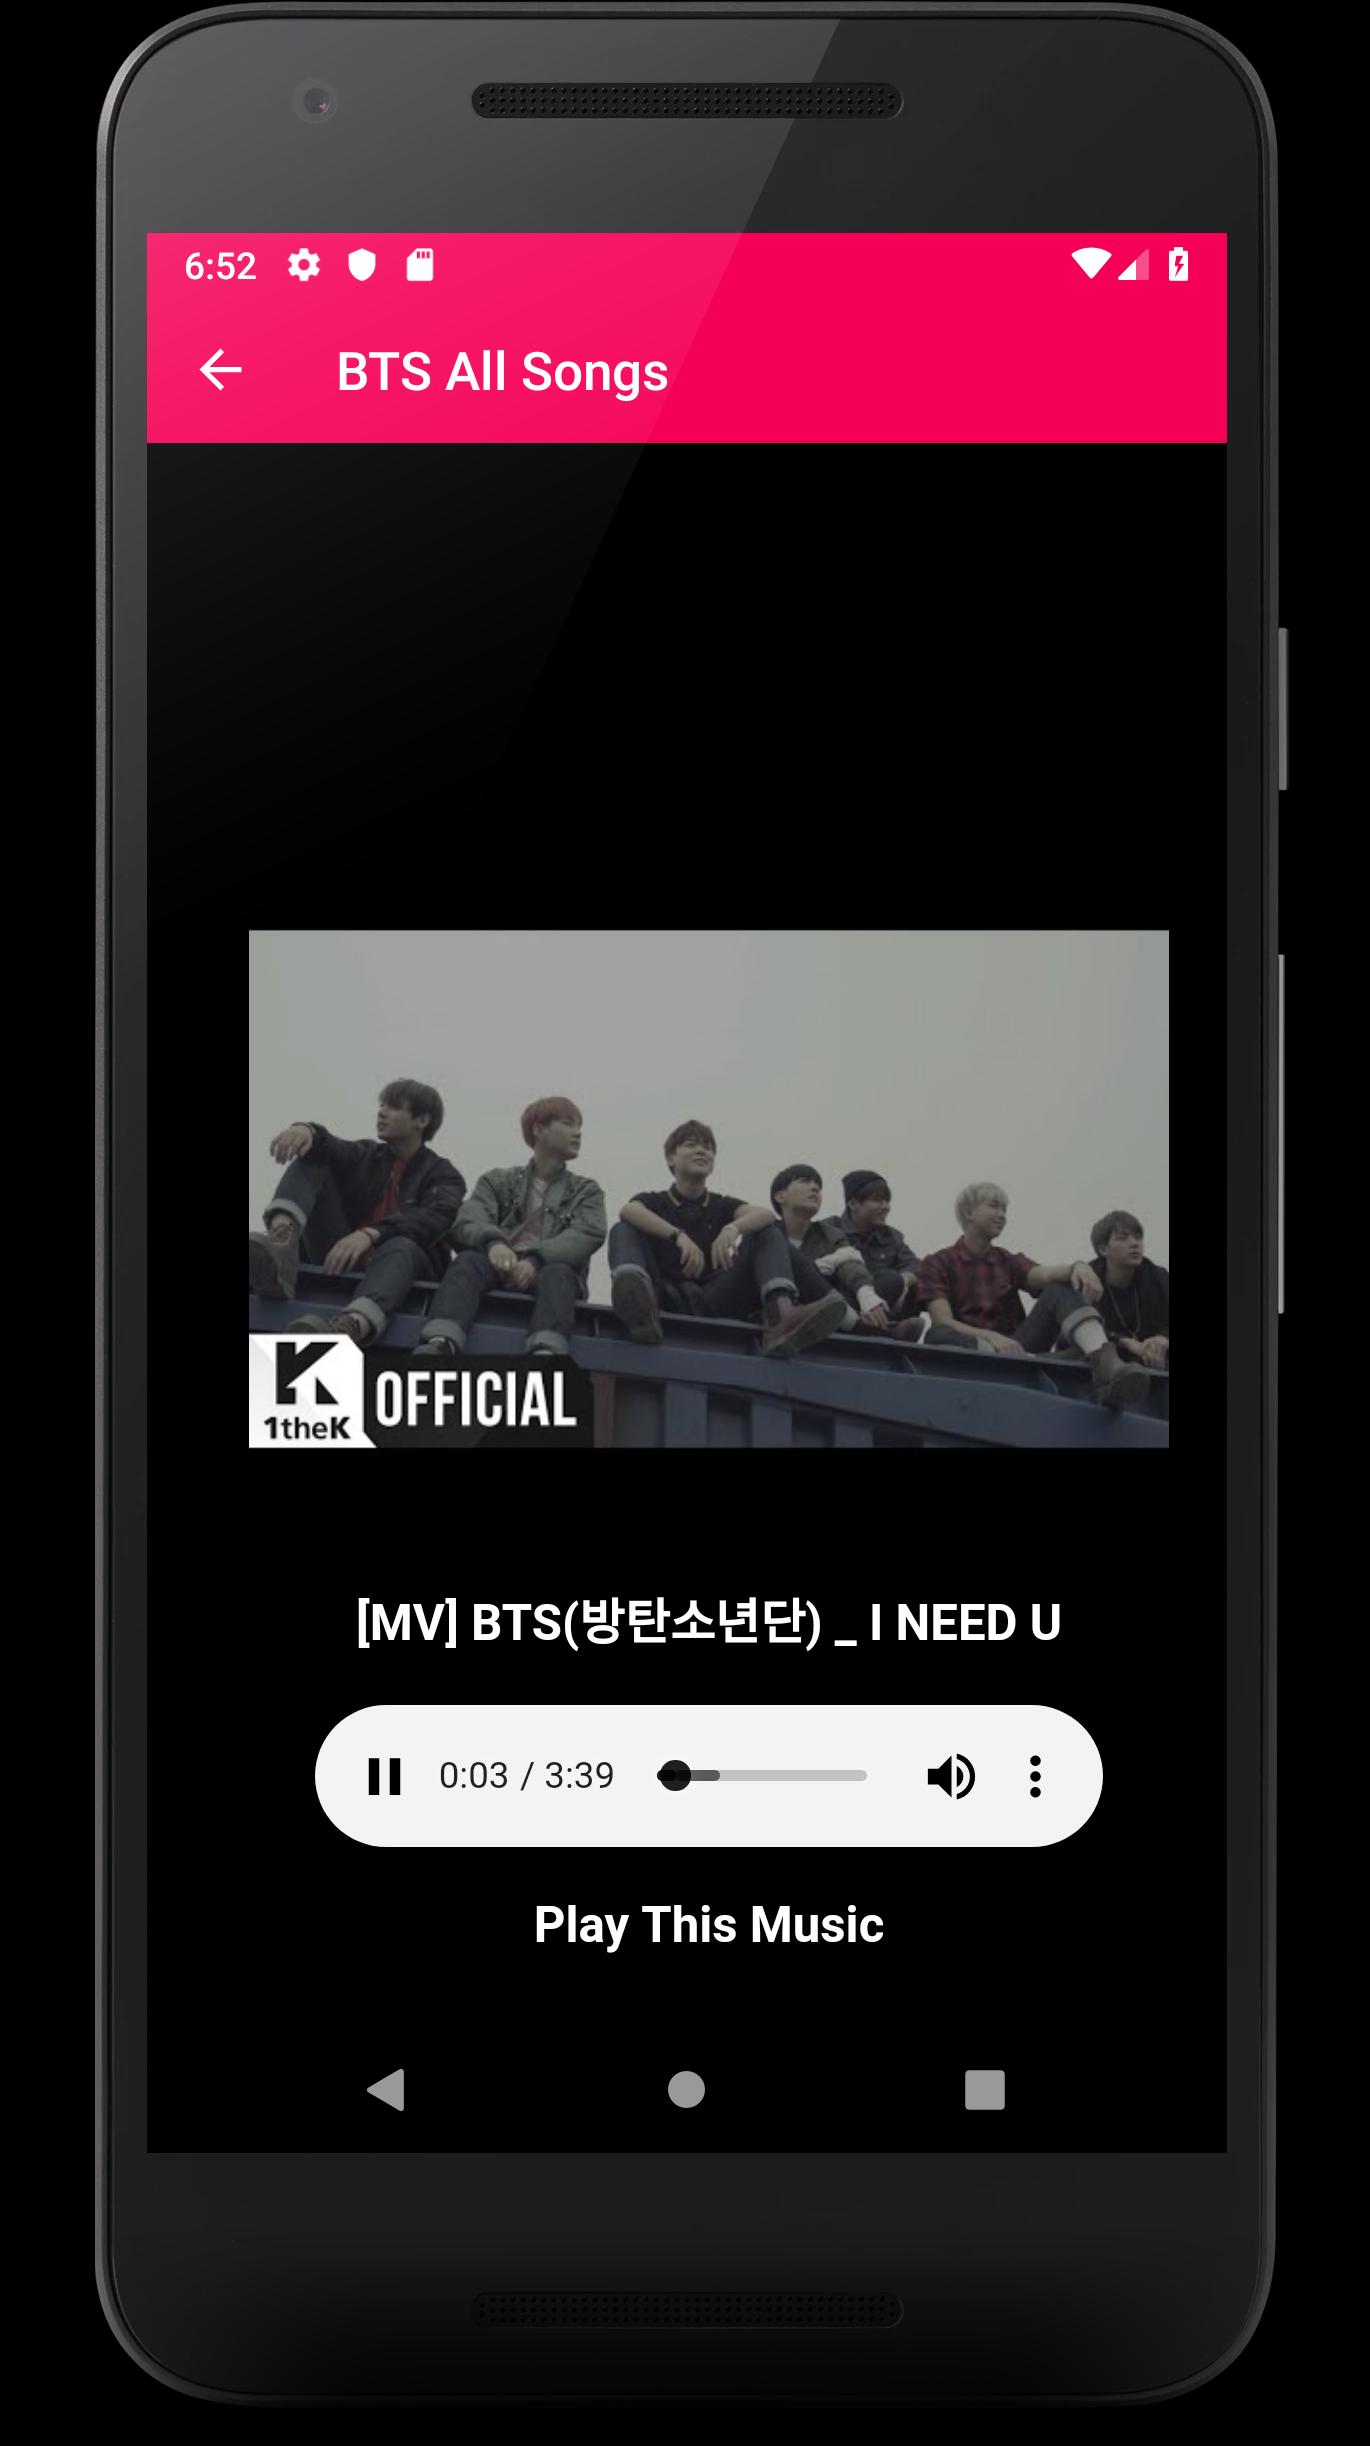 Bts All Music Video 2019 For Android Apk Download - bts songs roblox code blood sweat and tears